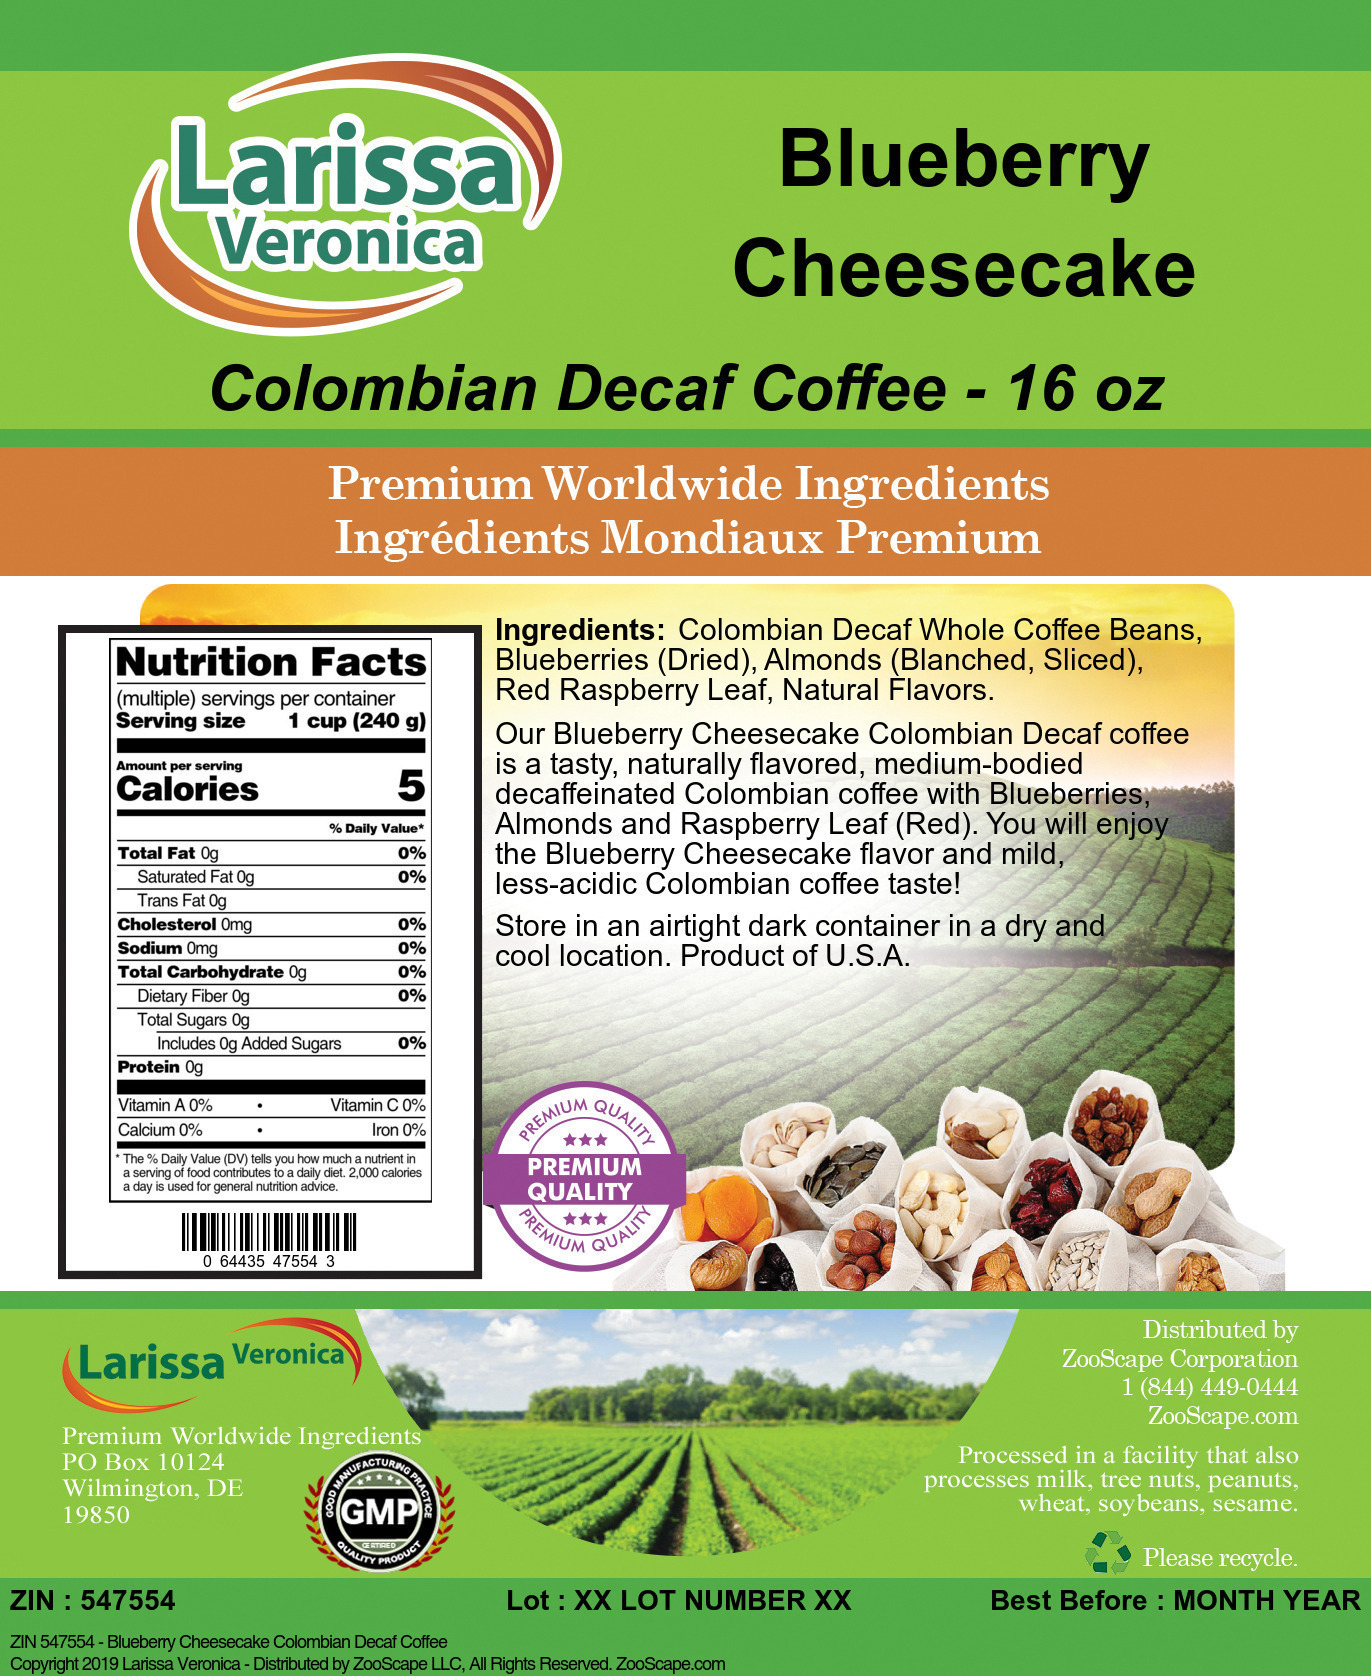 Blueberry Cheesecake Colombian Decaf Coffee - Label